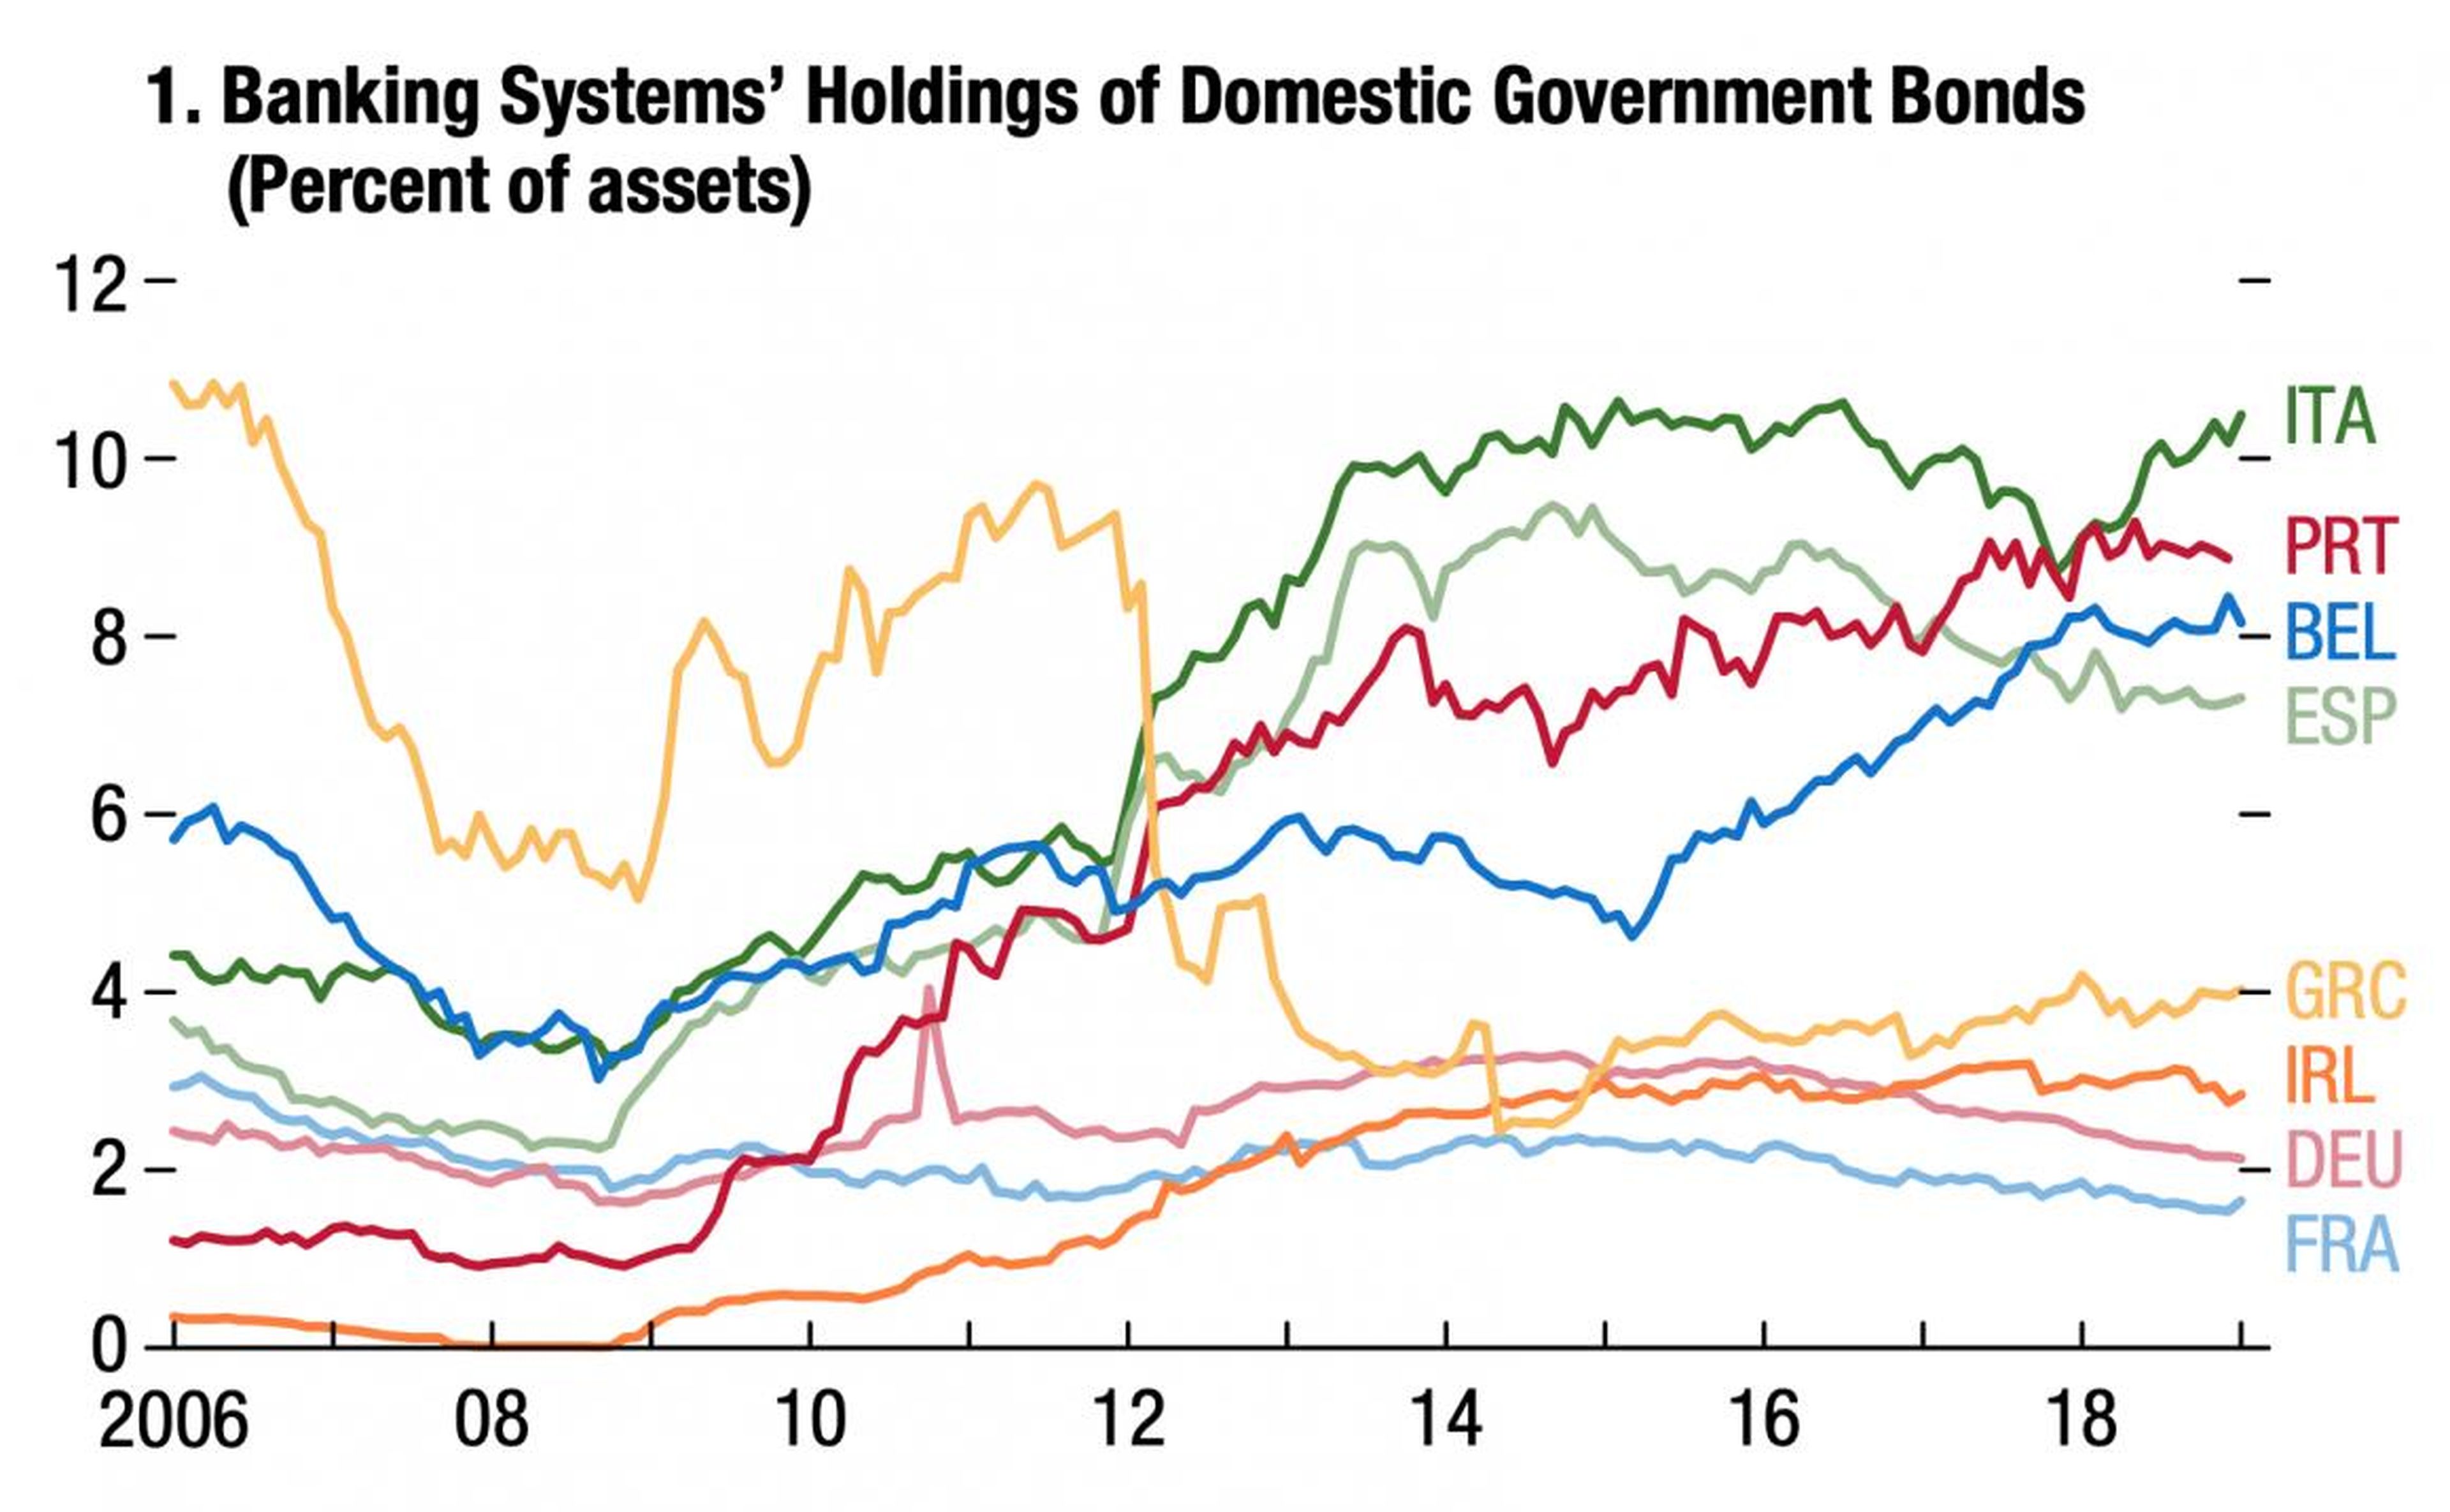 Italian banks hold a greater proportion of domestic debt than other countries' banks.